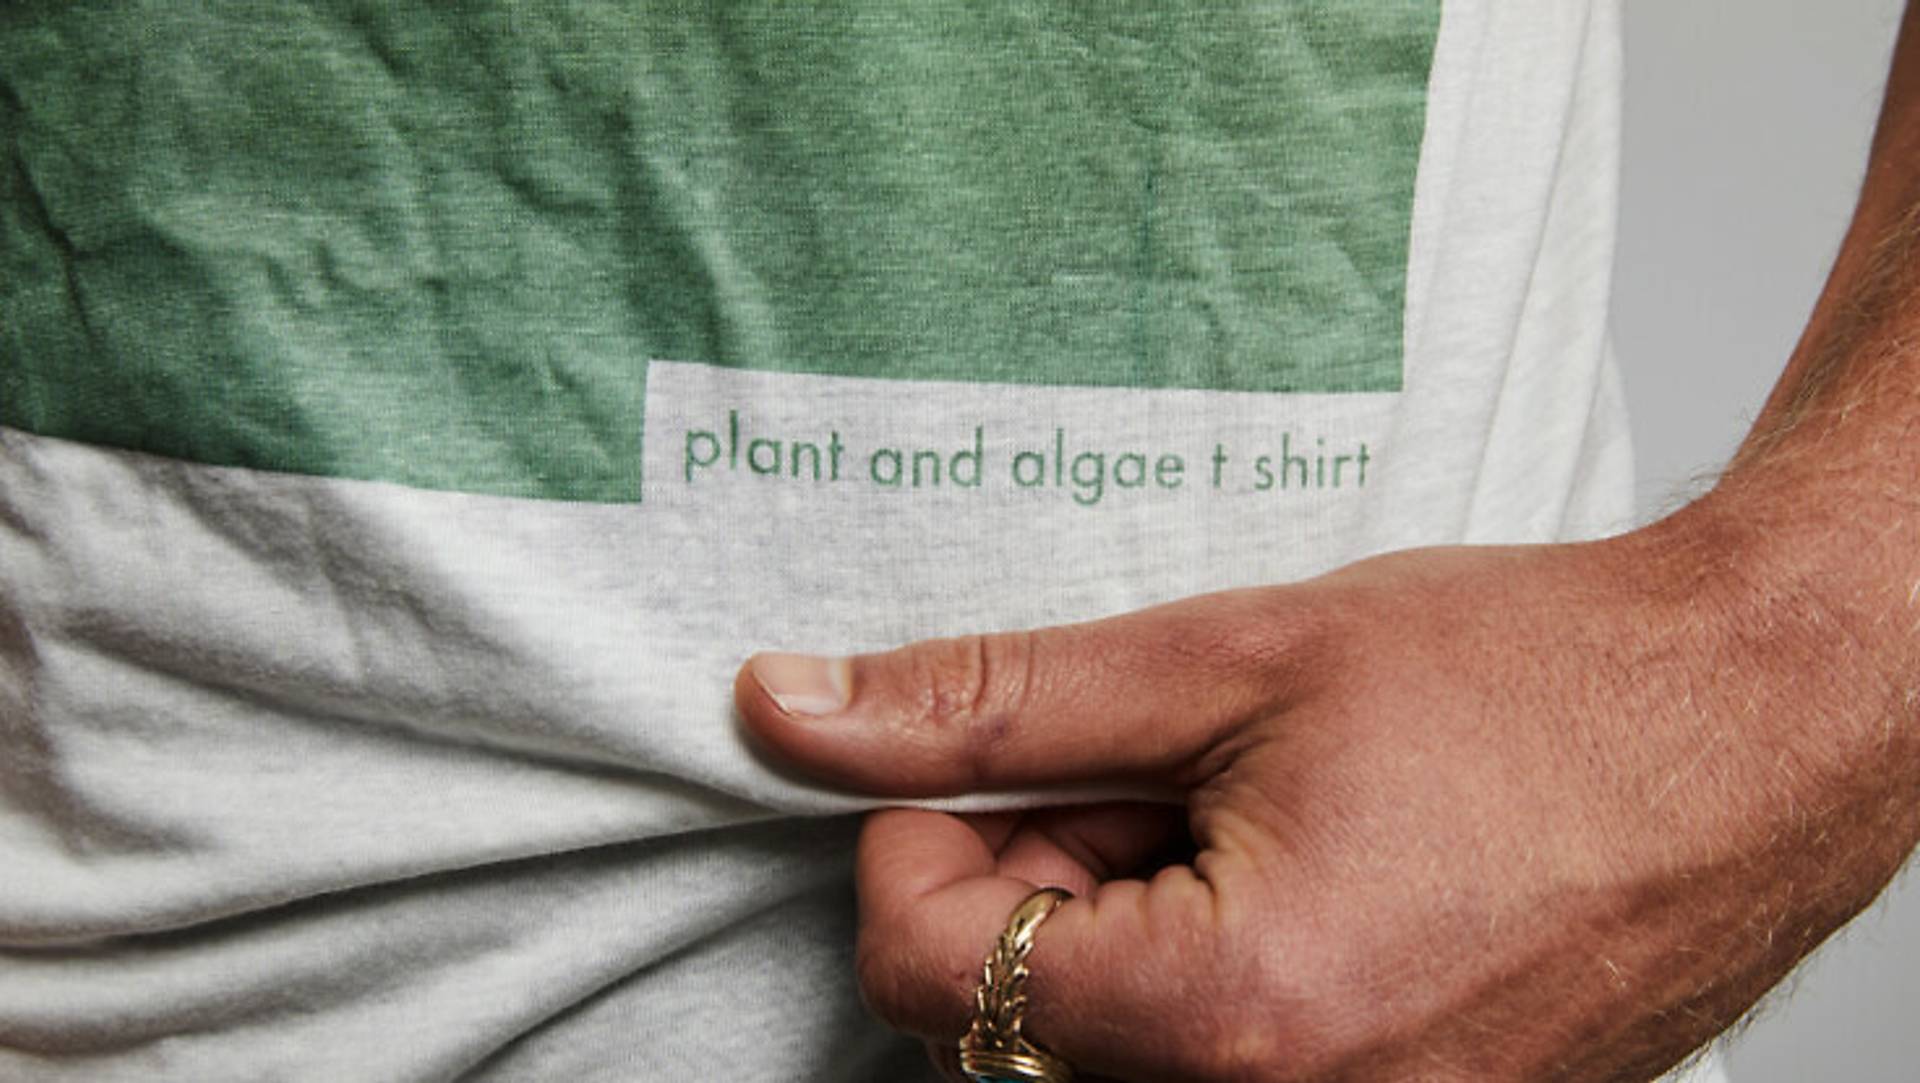 Compostable algae t-shirt targets luxe eco-consumers